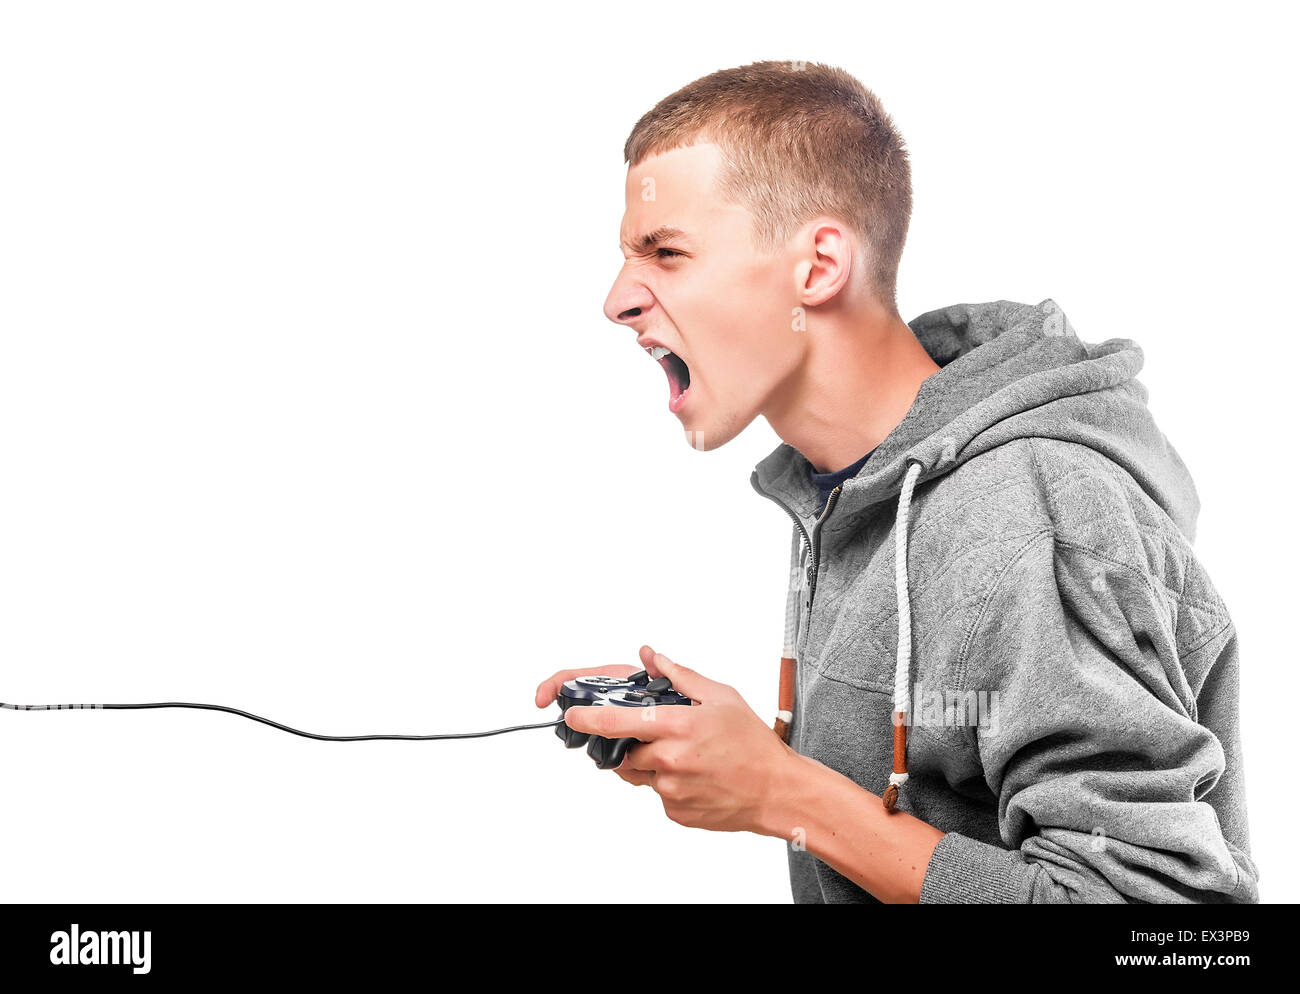 Young man with a joystick for game console side view. Isolated on white. Stock Photo